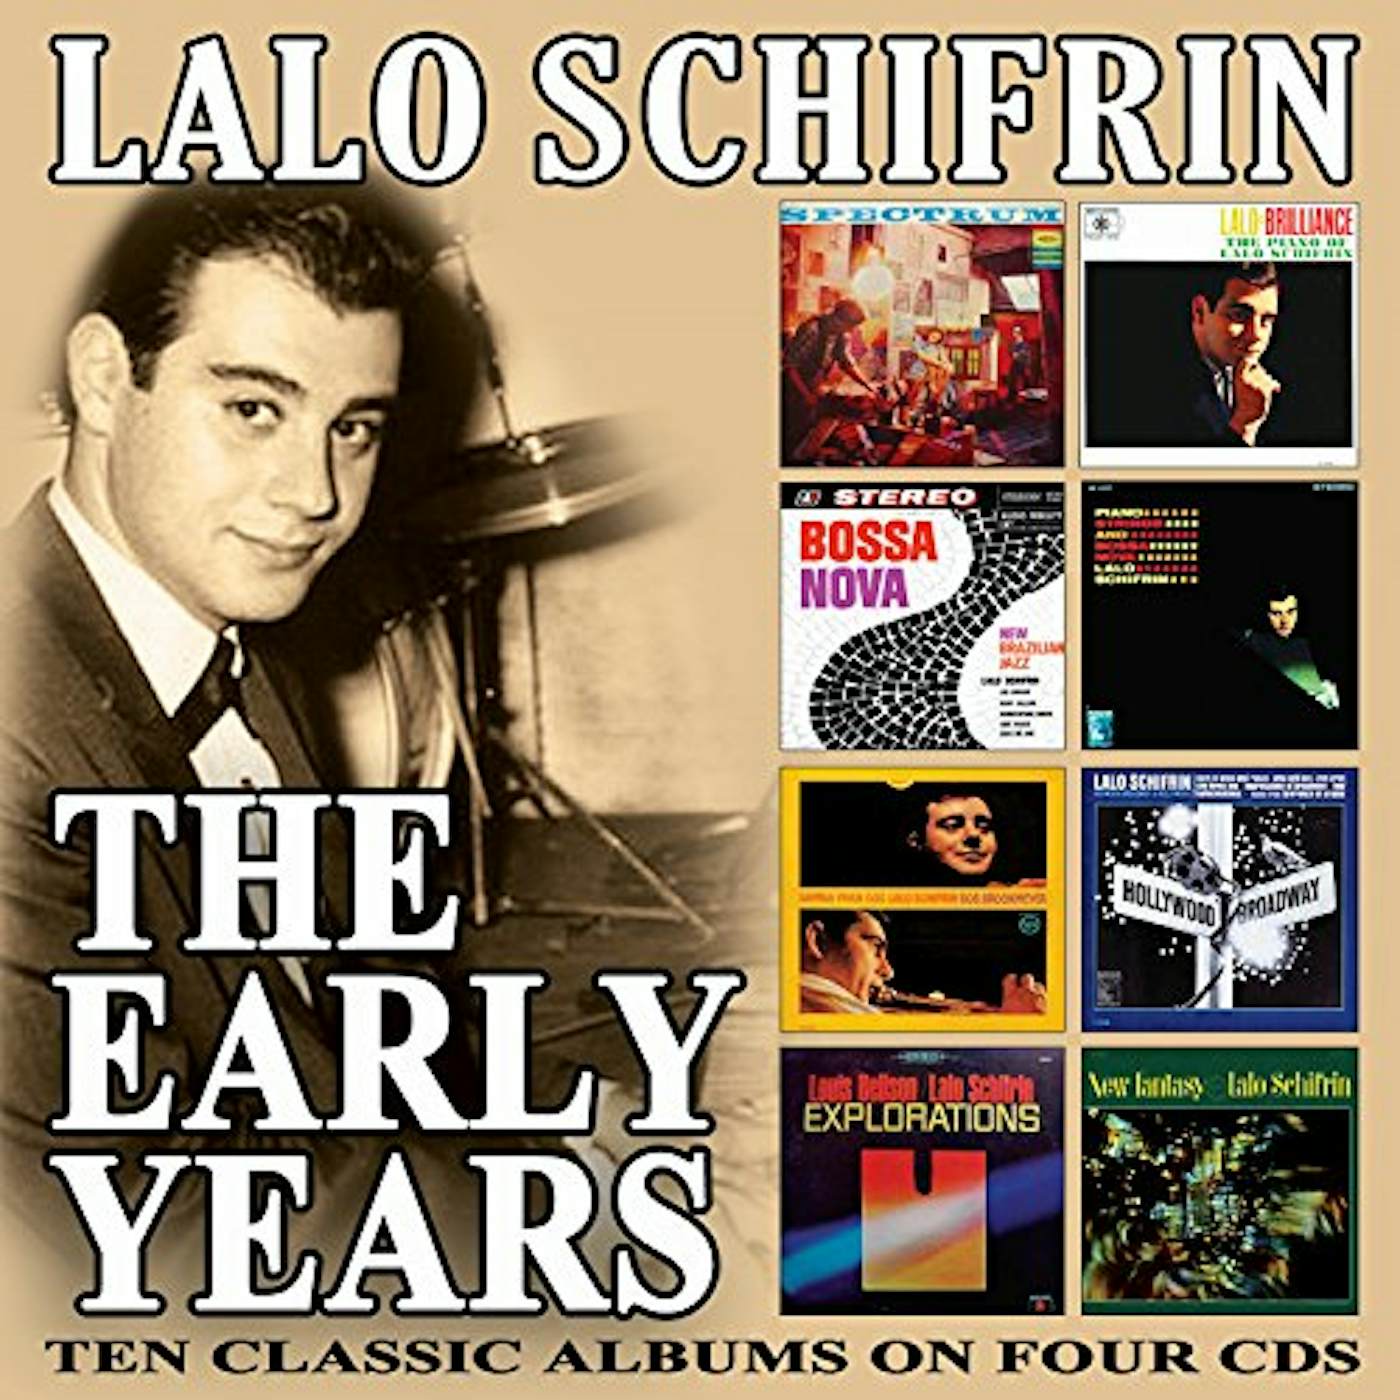 Lalo Schifrin EARLY YEARS CD